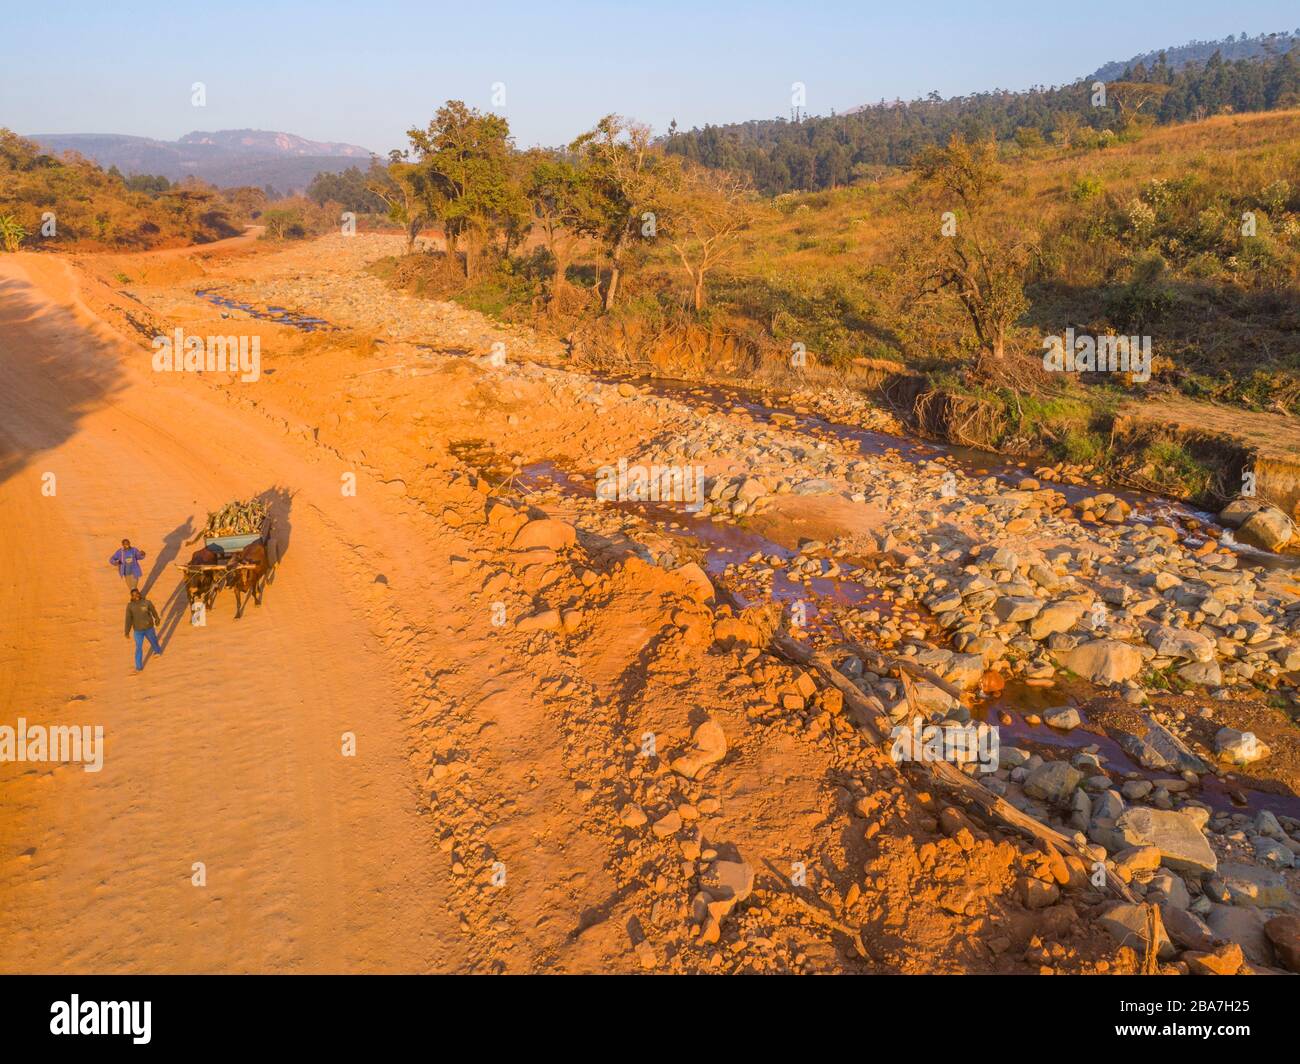 An aerial picture of the destruction caused by cyclone Idai in Zimbabwe's Chimanimani. Stock Photo